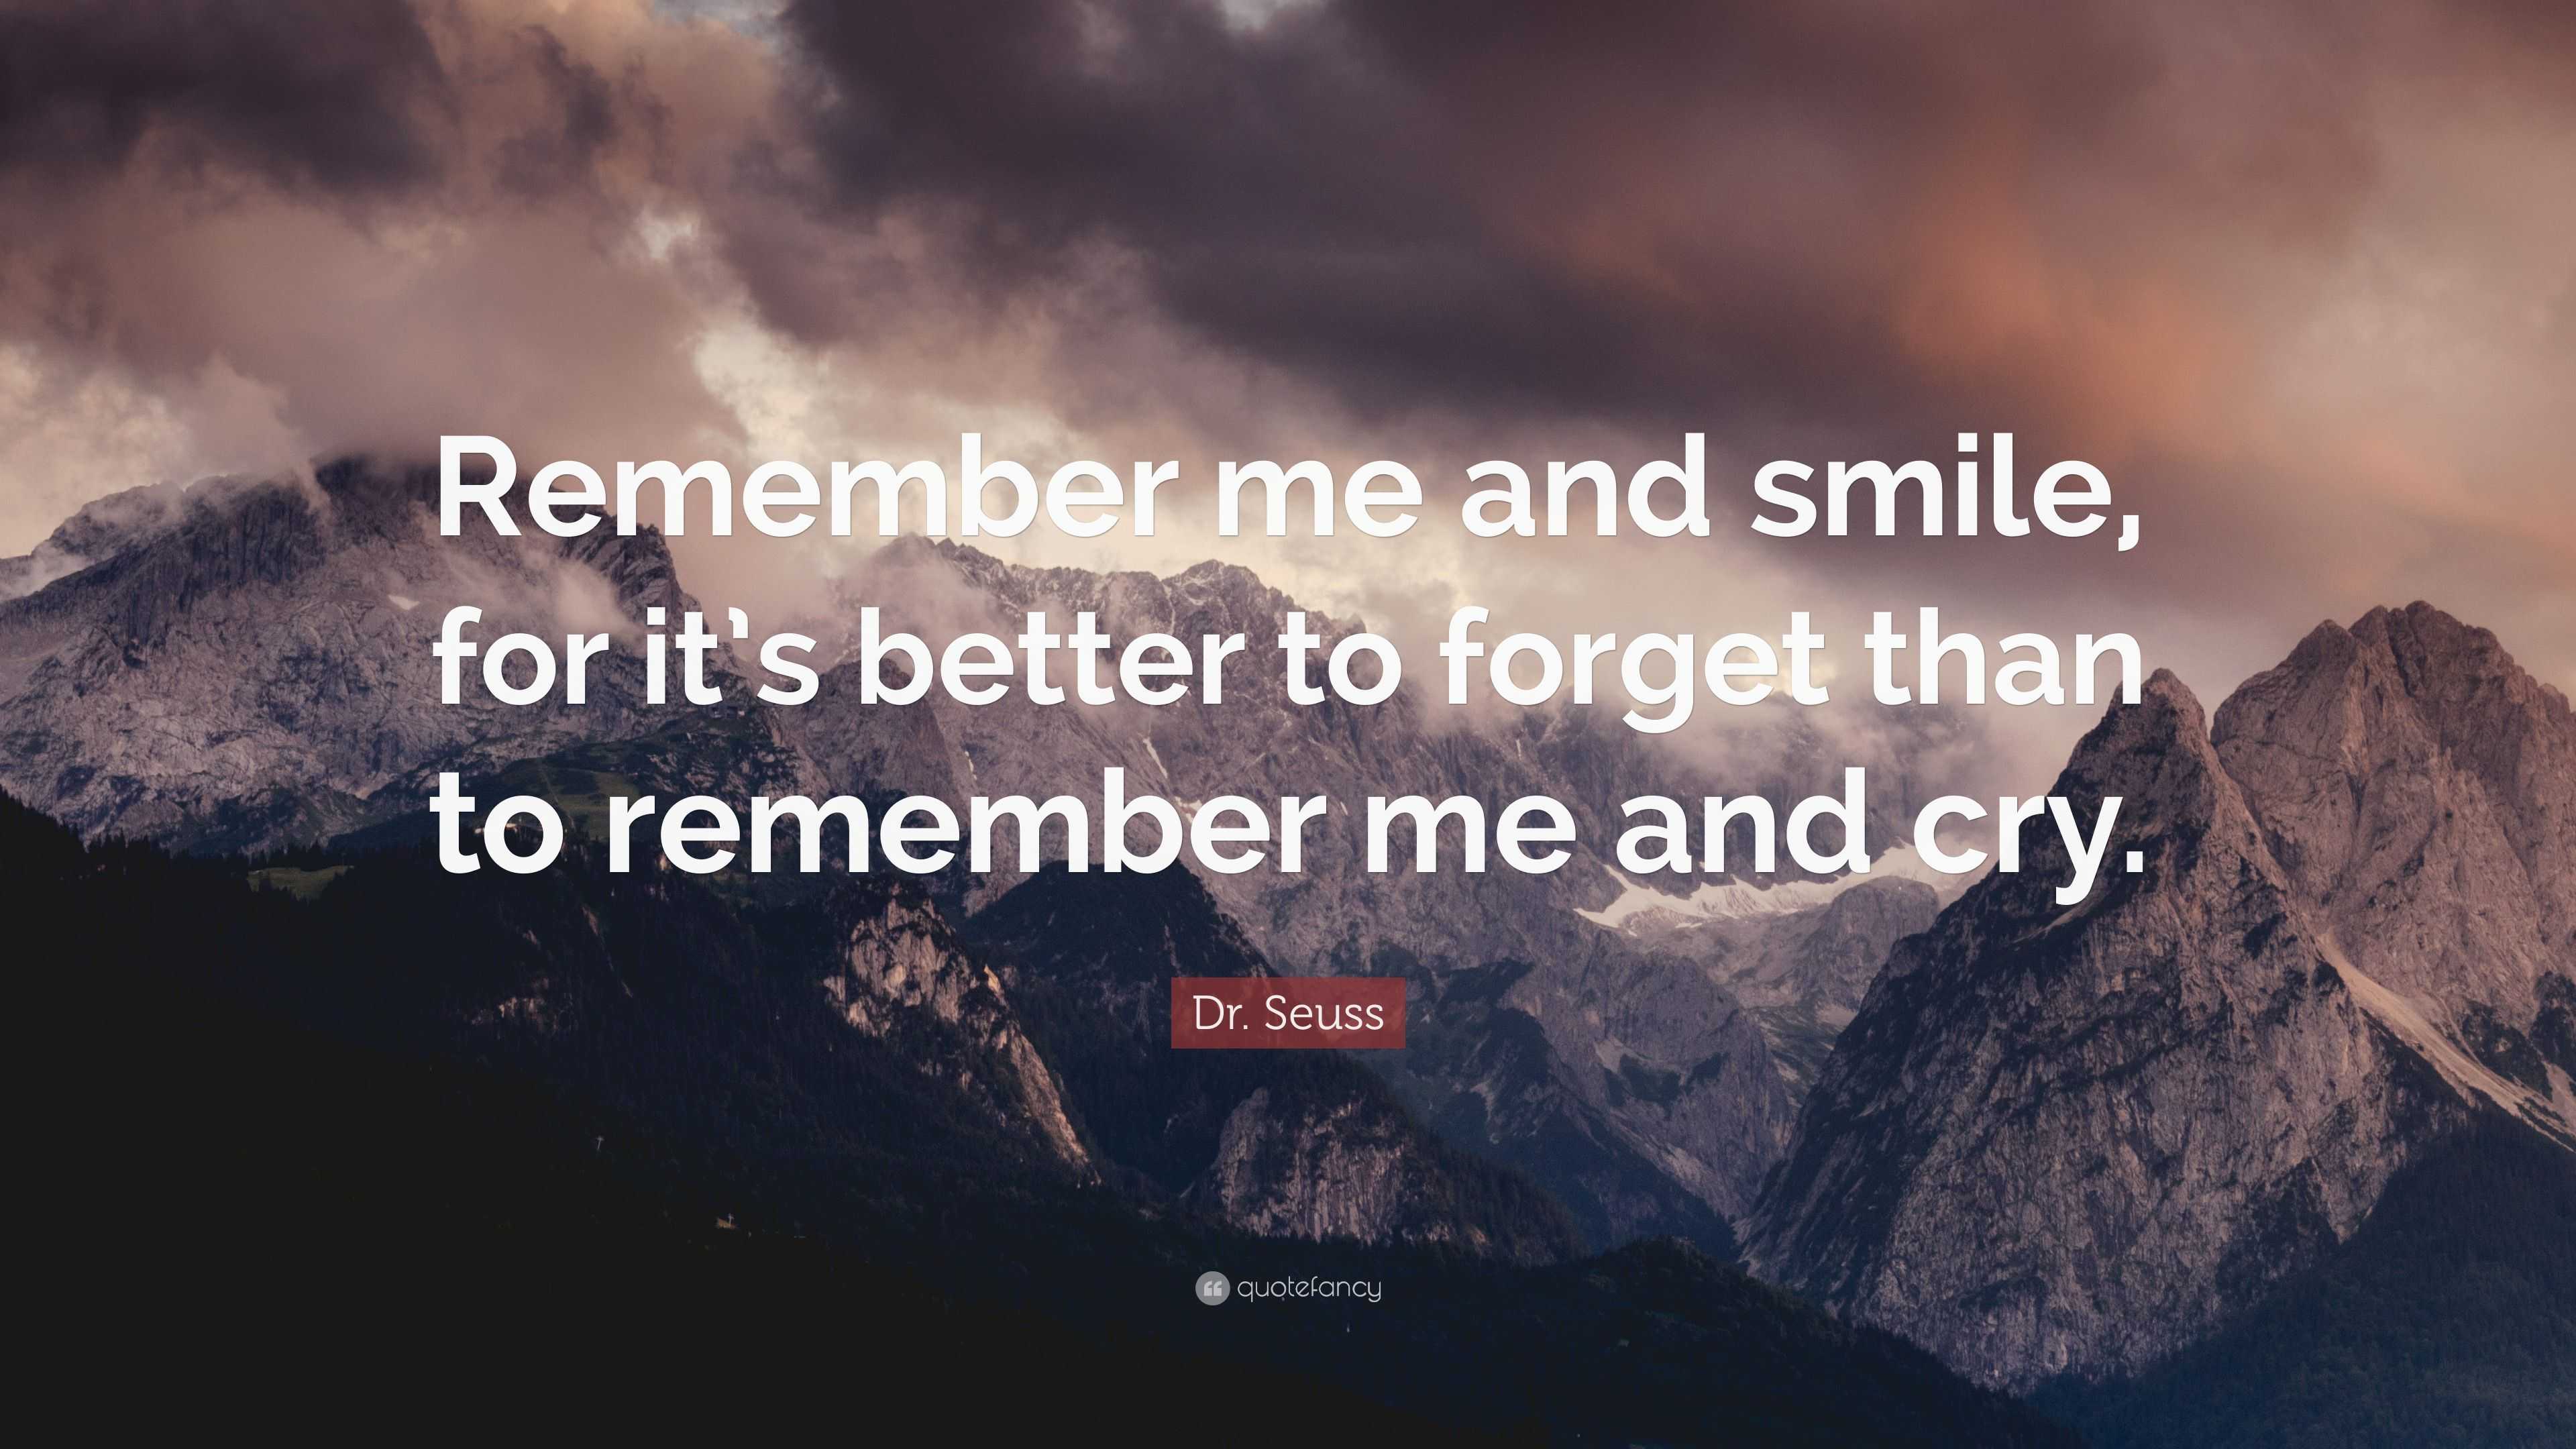 Dr. Seuss Quote: “Remember me and smile, for it’s better to forget than